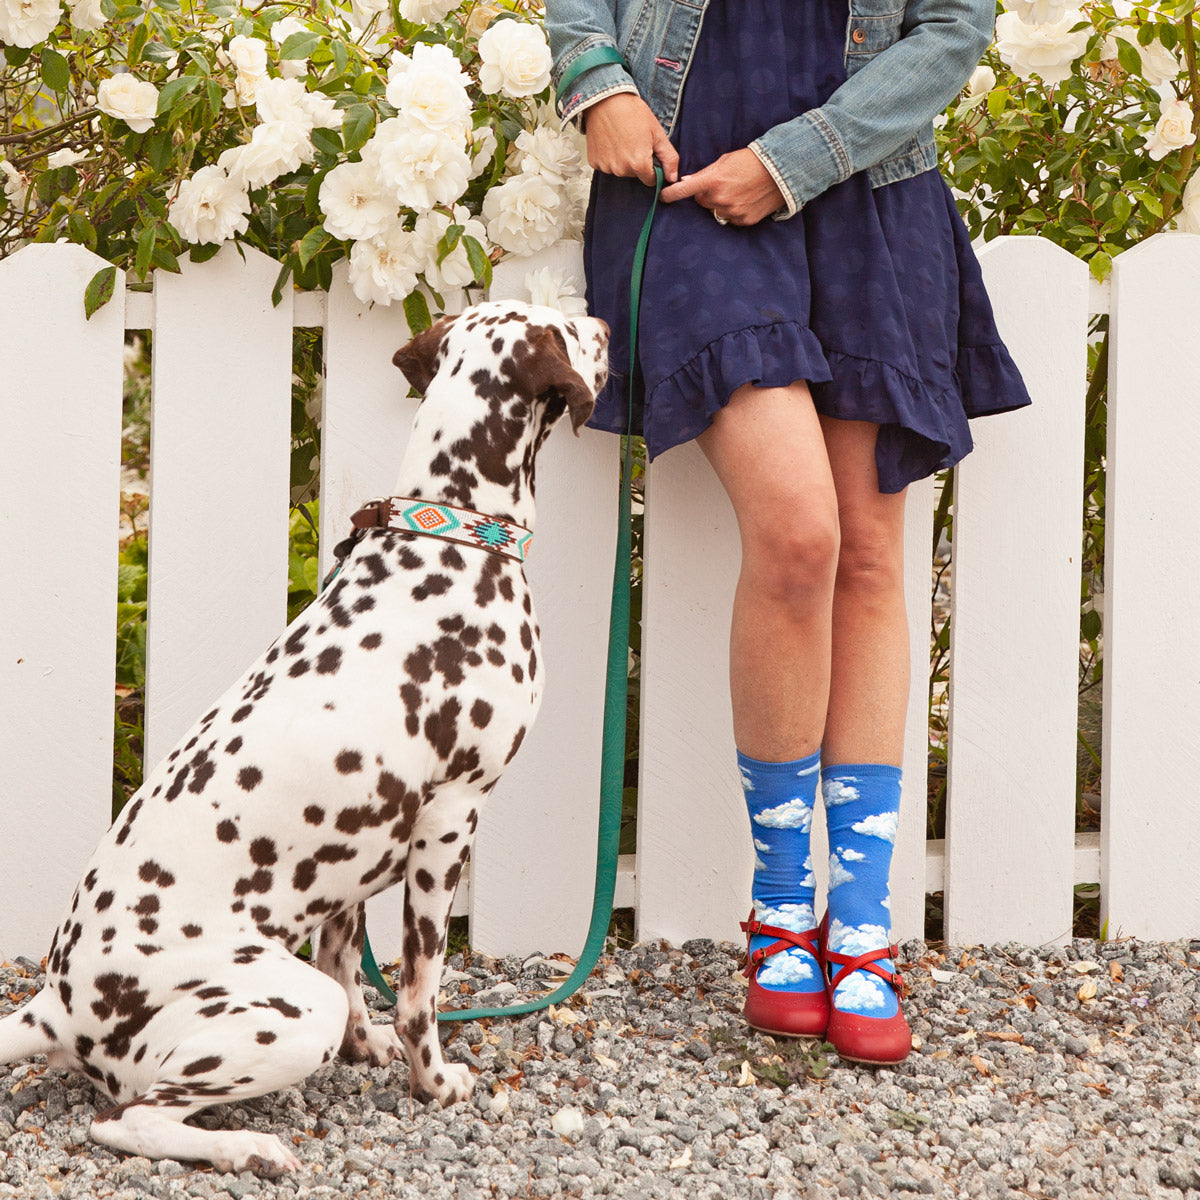 A woman wears crew socks with clouds and blue skies with red Mary Janes and a mini dress while she stands beside a white fence and a dalmatian dog